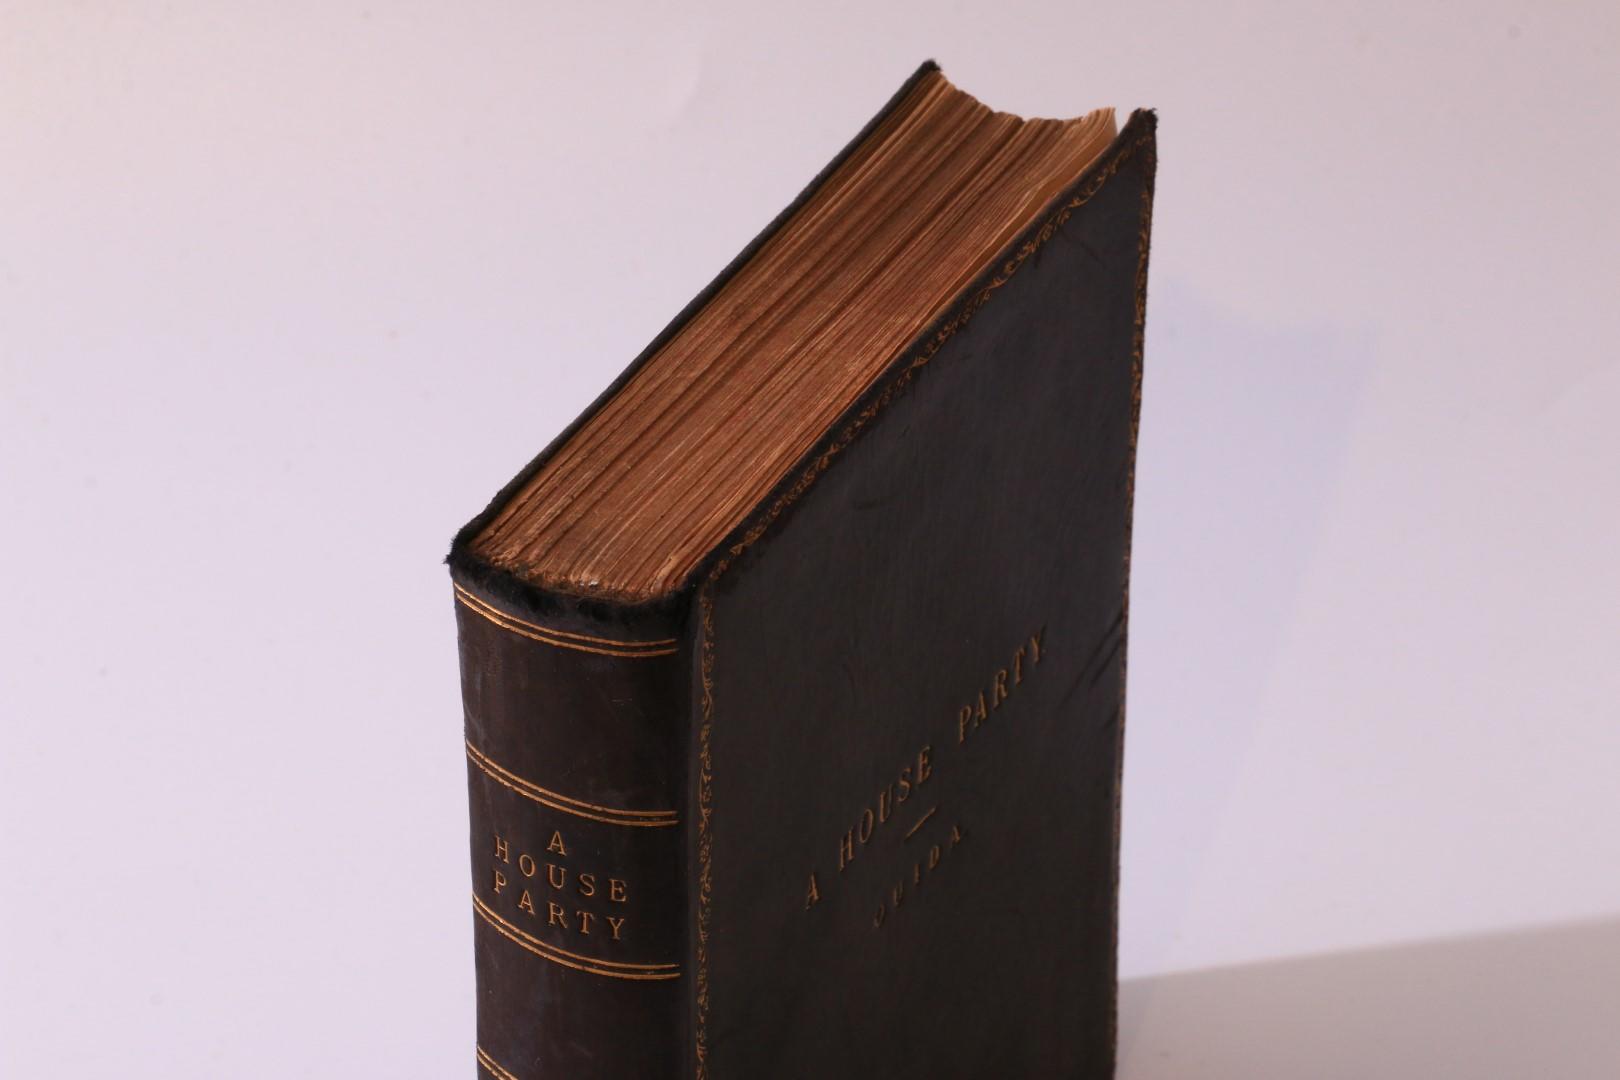 Ouida - A House Party - Author's Corrected Copy - Hurst & Blackett, 1887, Signed First Edition.